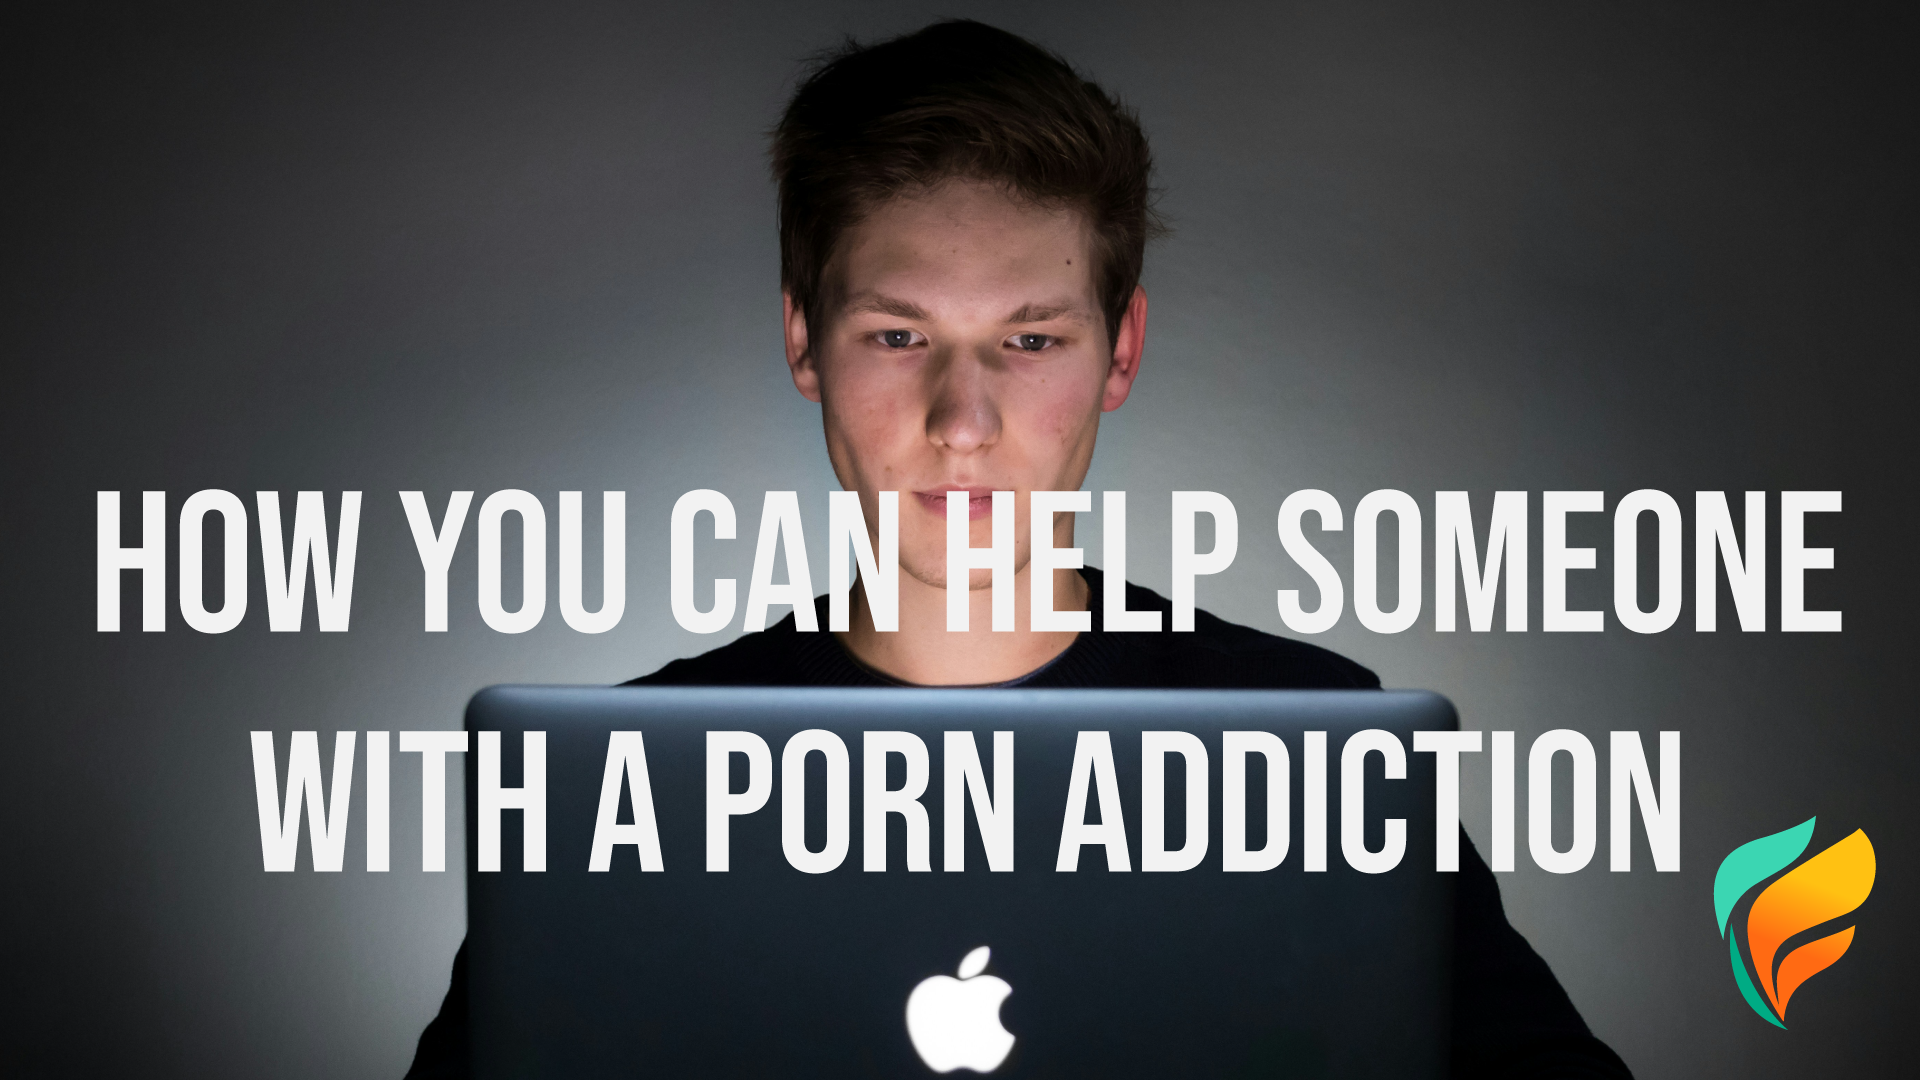 How to help someone with a porn addiction